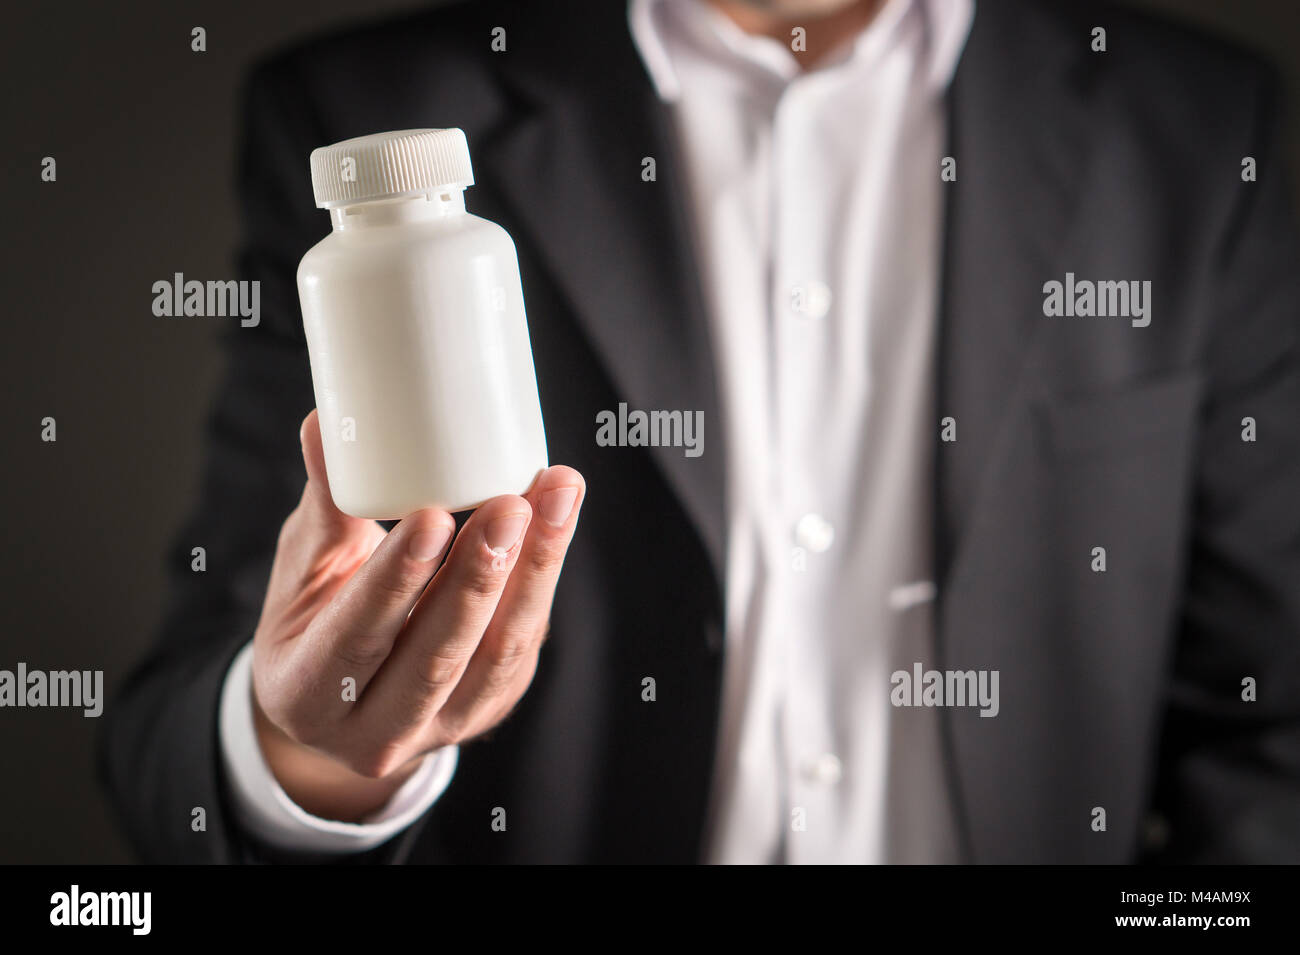 Pharmaceutical representative, consultant or head director or manager of medicine company with medicine bottle. Man in a suit holding pills or tablets Stock Photo